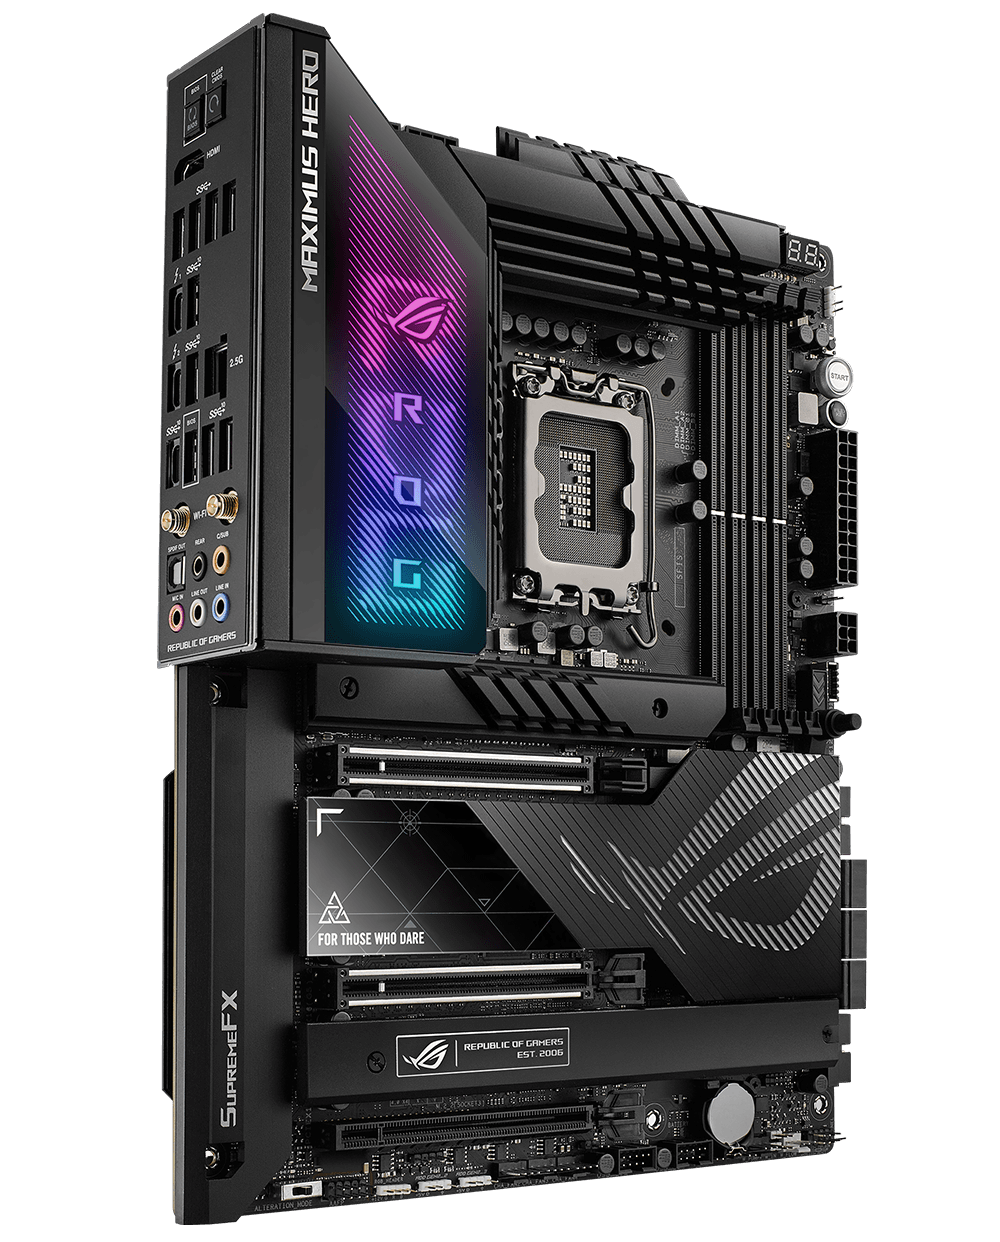 Image with ROG Maximus Z790 Hero motherboard to showcase the connectivity of PCIe 5.0, USB4, WIFI and LAN supports